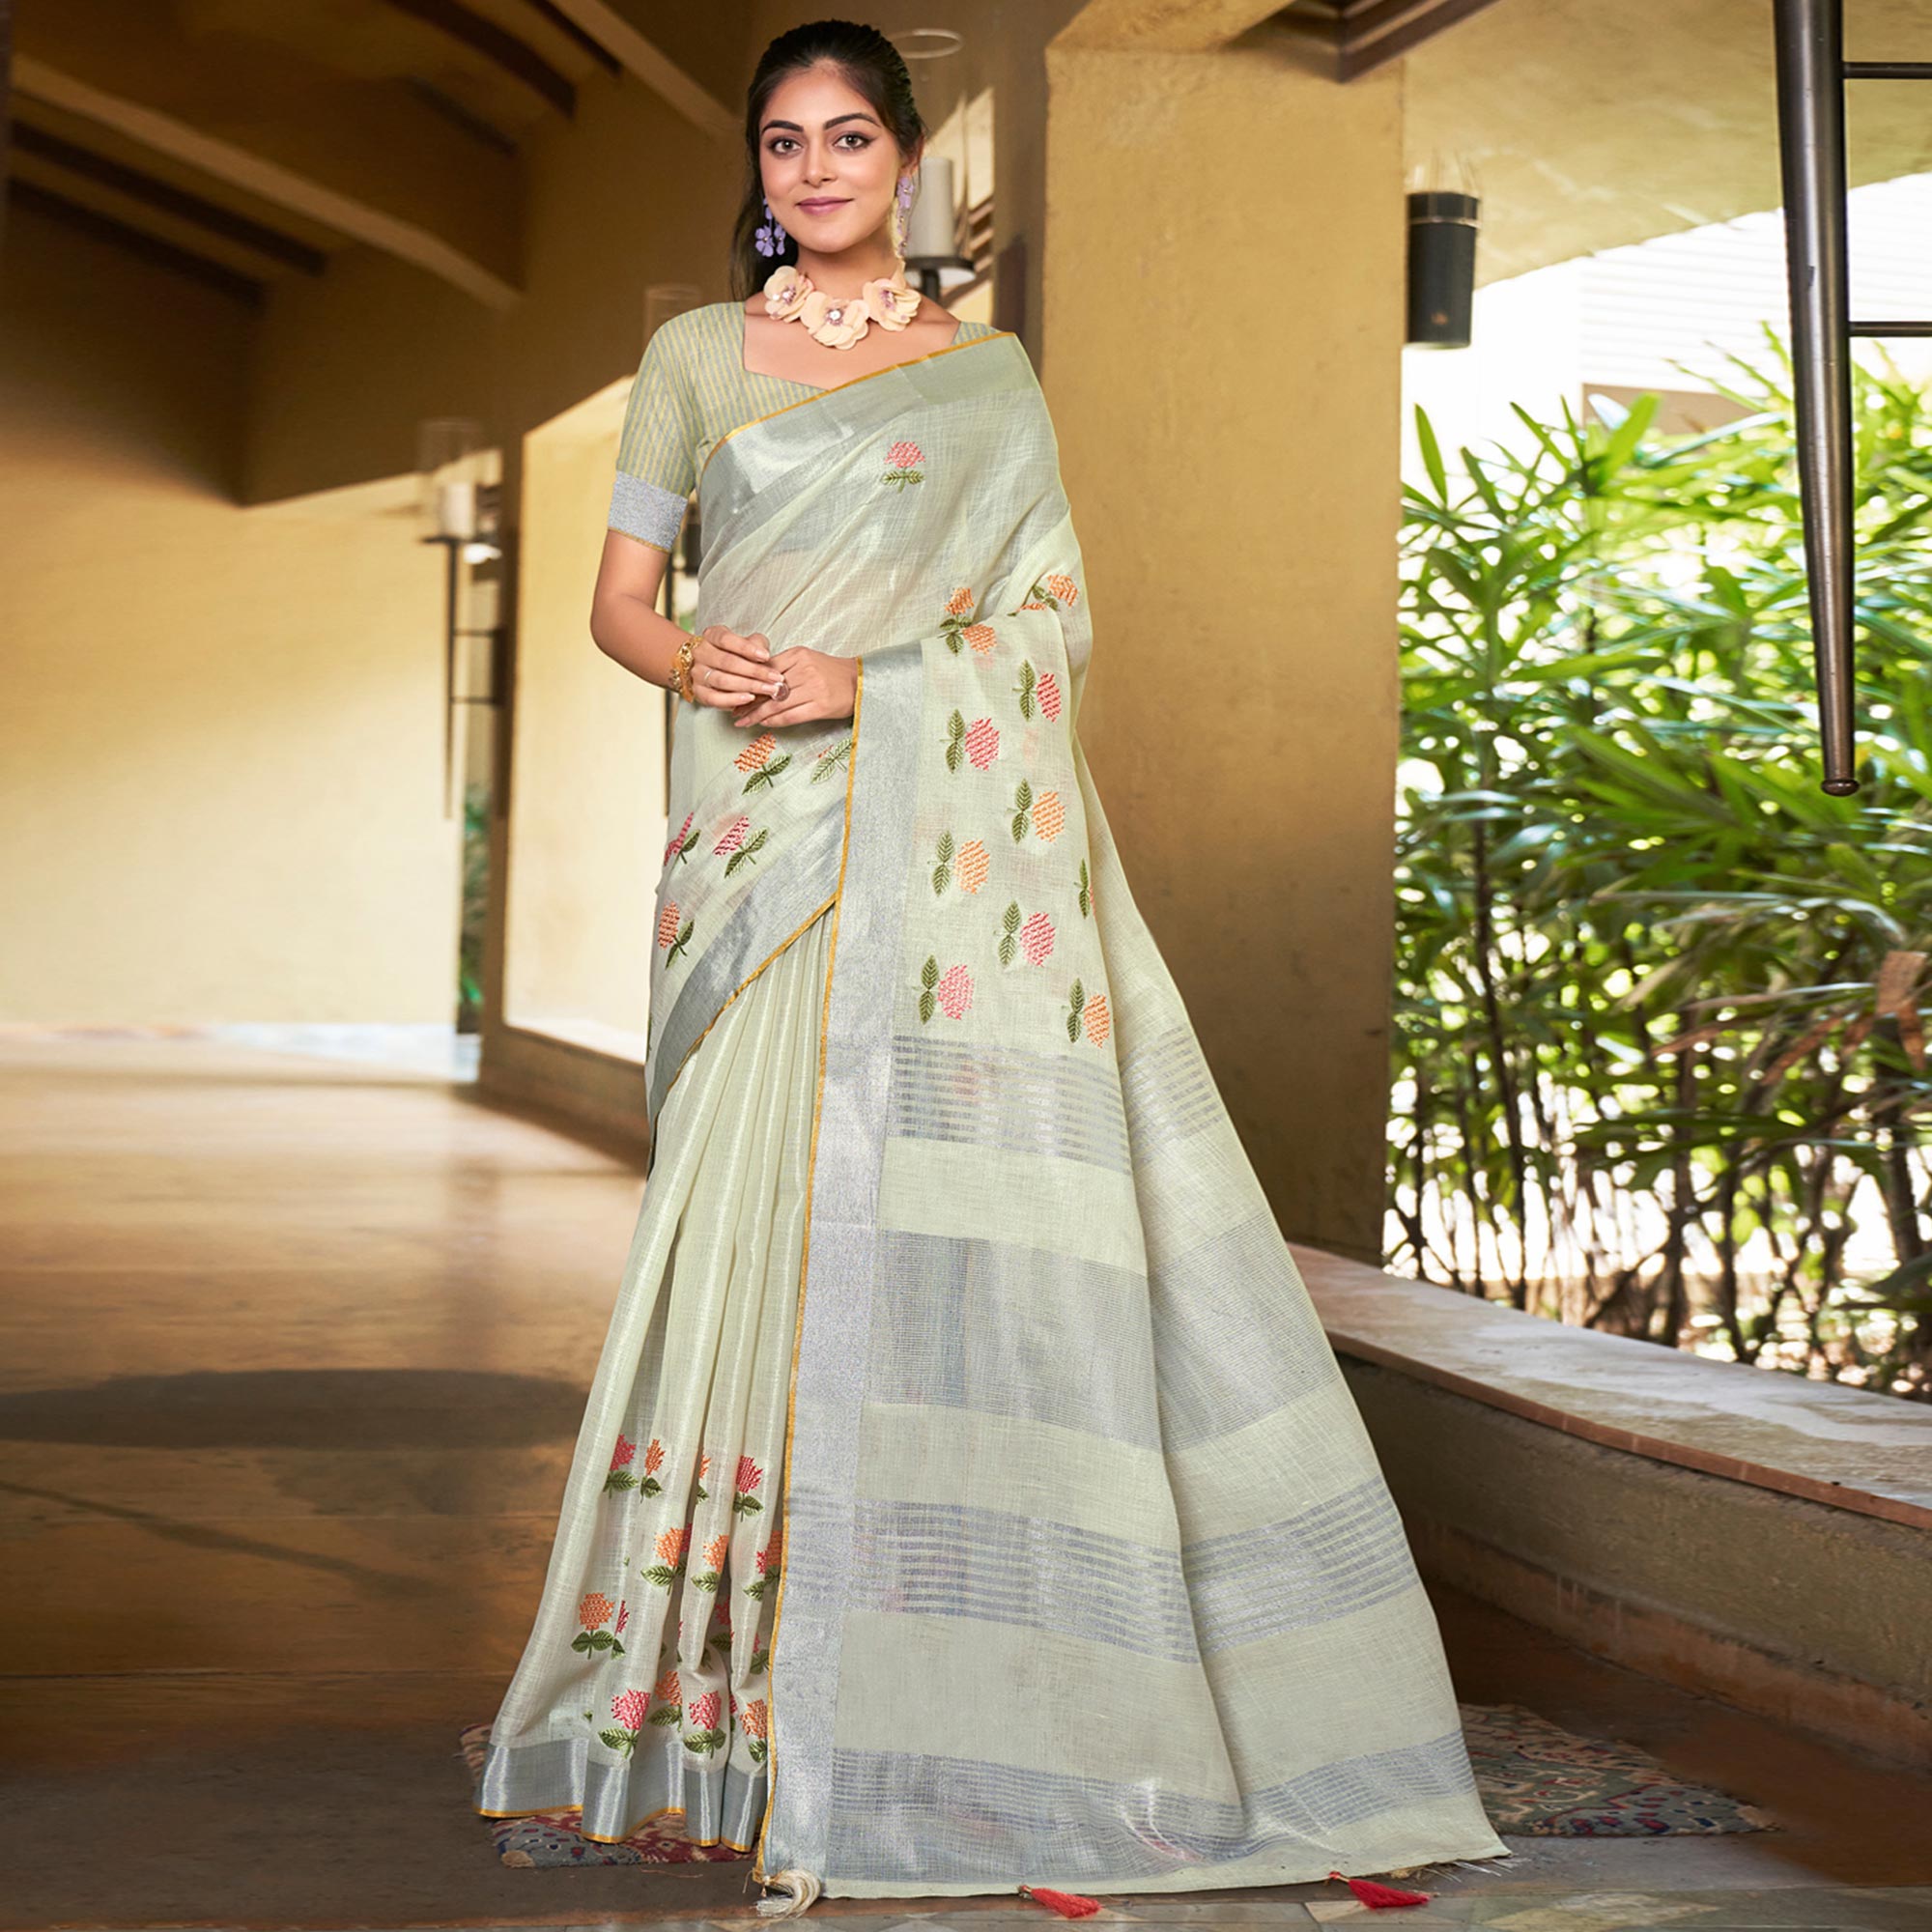 Pale Yellow Floral Embroidered Linen Saree With Tassels